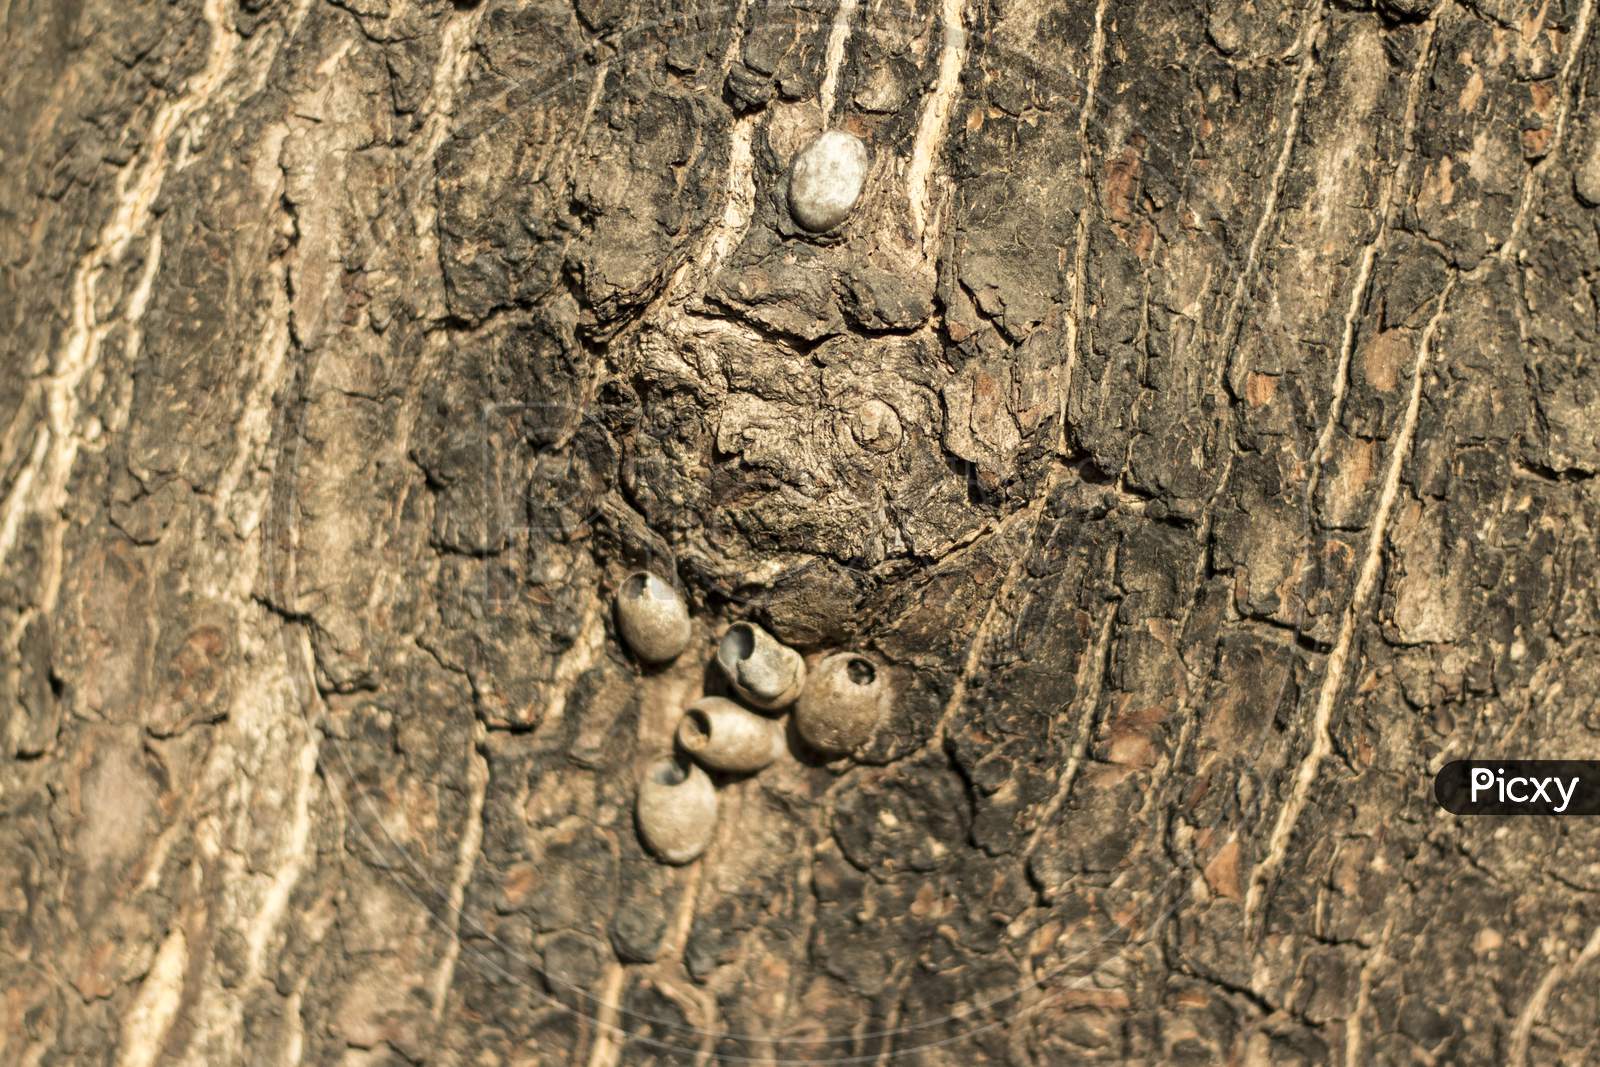 Tree plant with small eggs